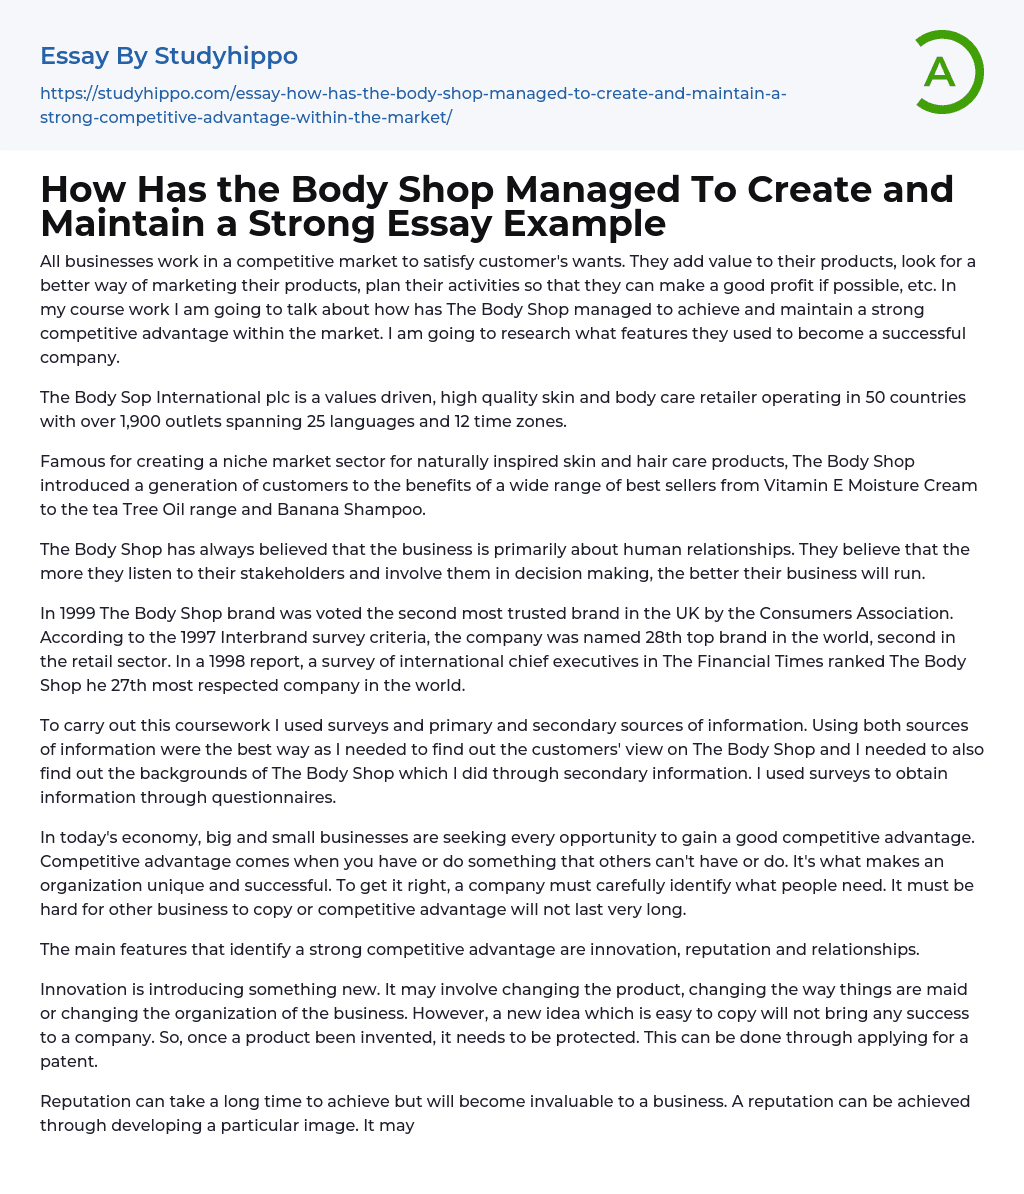 How Has the Body Shop Managed To Create and Maintain a Strong Essay Example